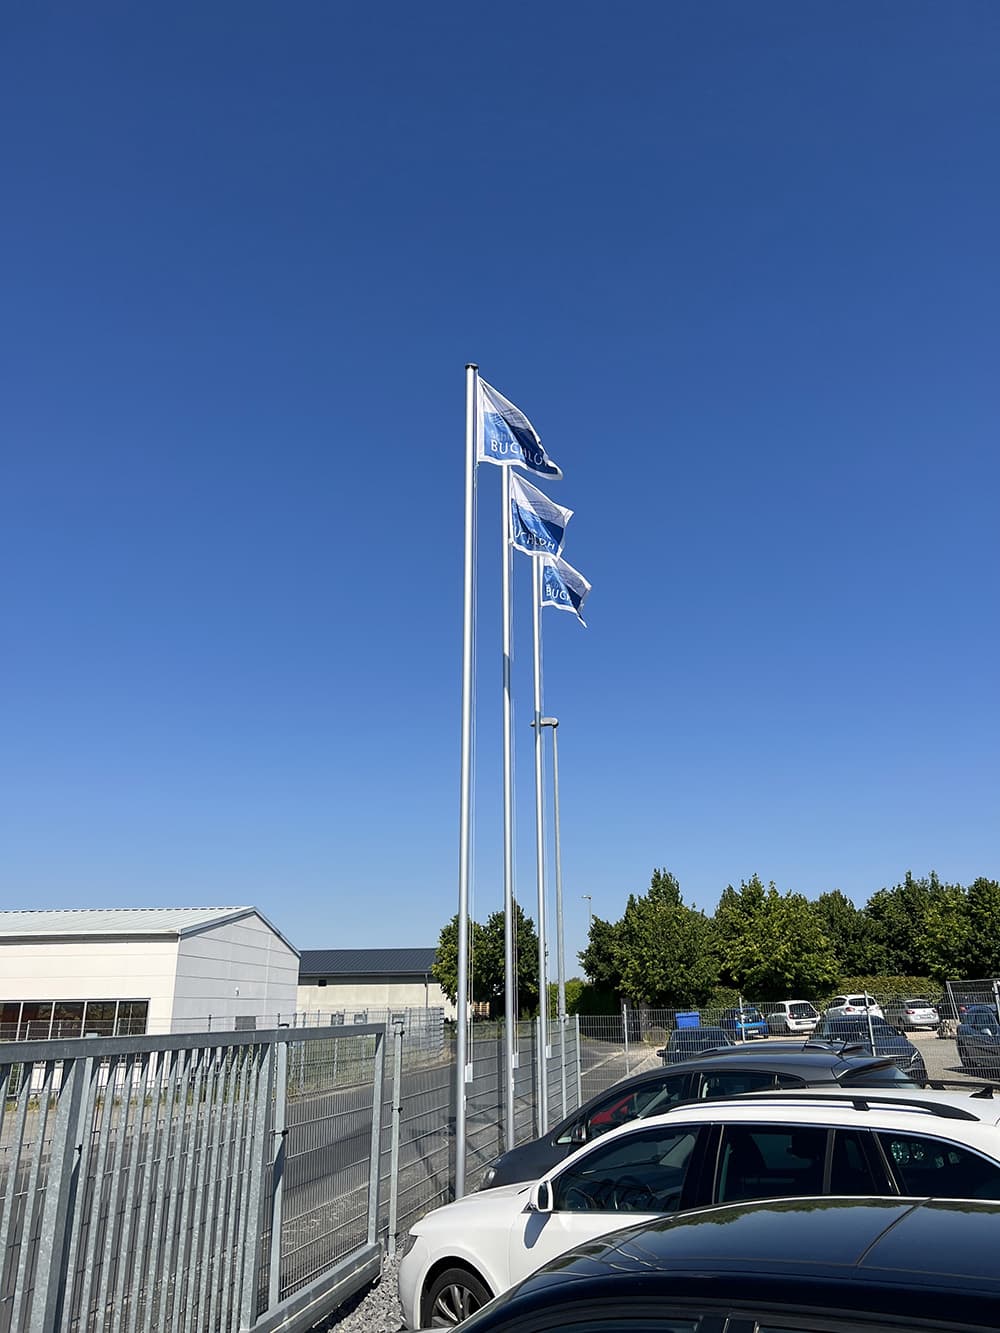 The company is expanding and raises its flags in Bruchhausen in front of their new office.